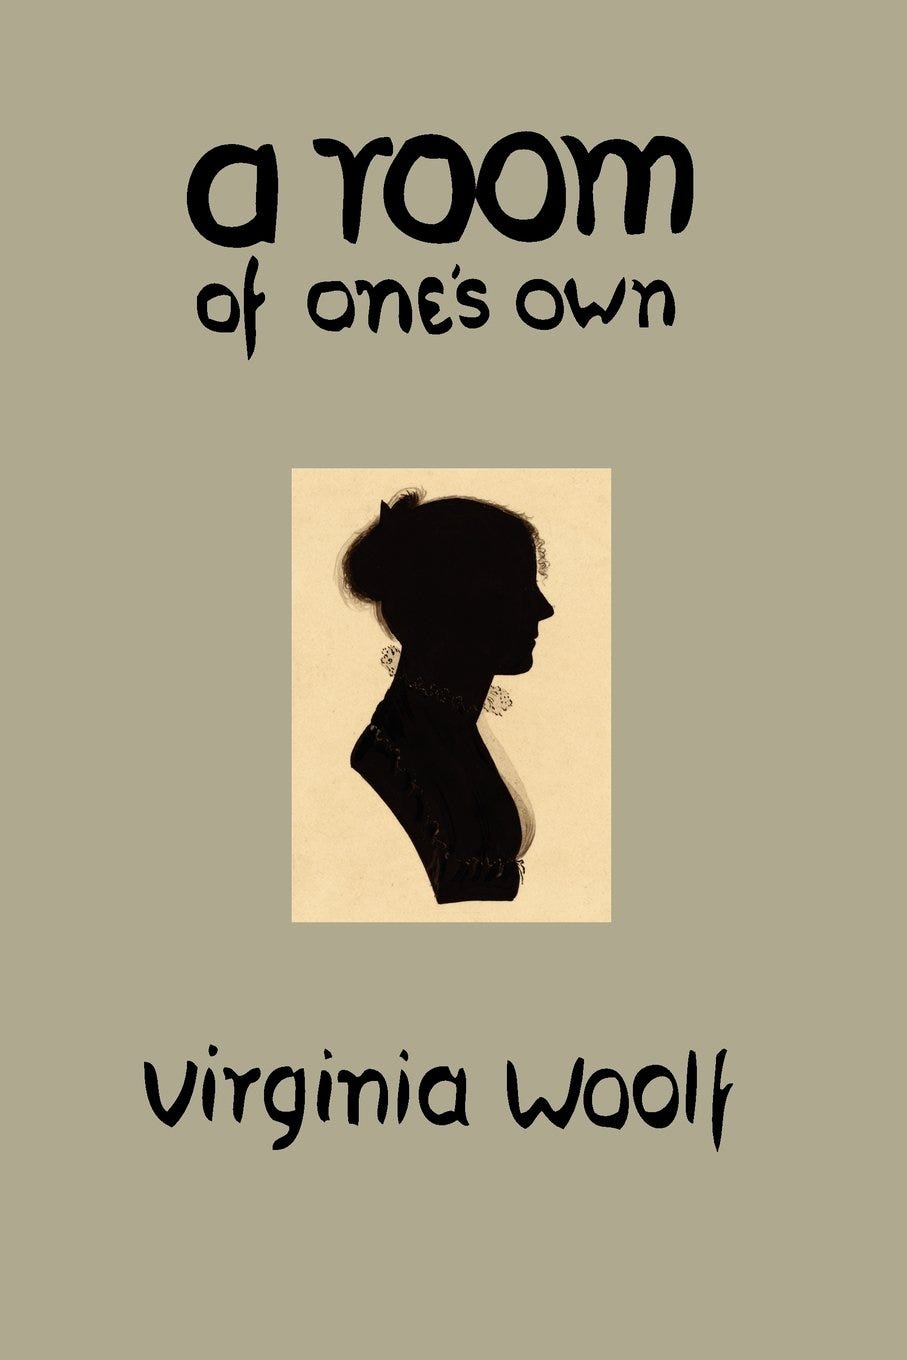 Amazon.com: A Room of One's Own: 9781614272779: Woolf, Virginia: Books